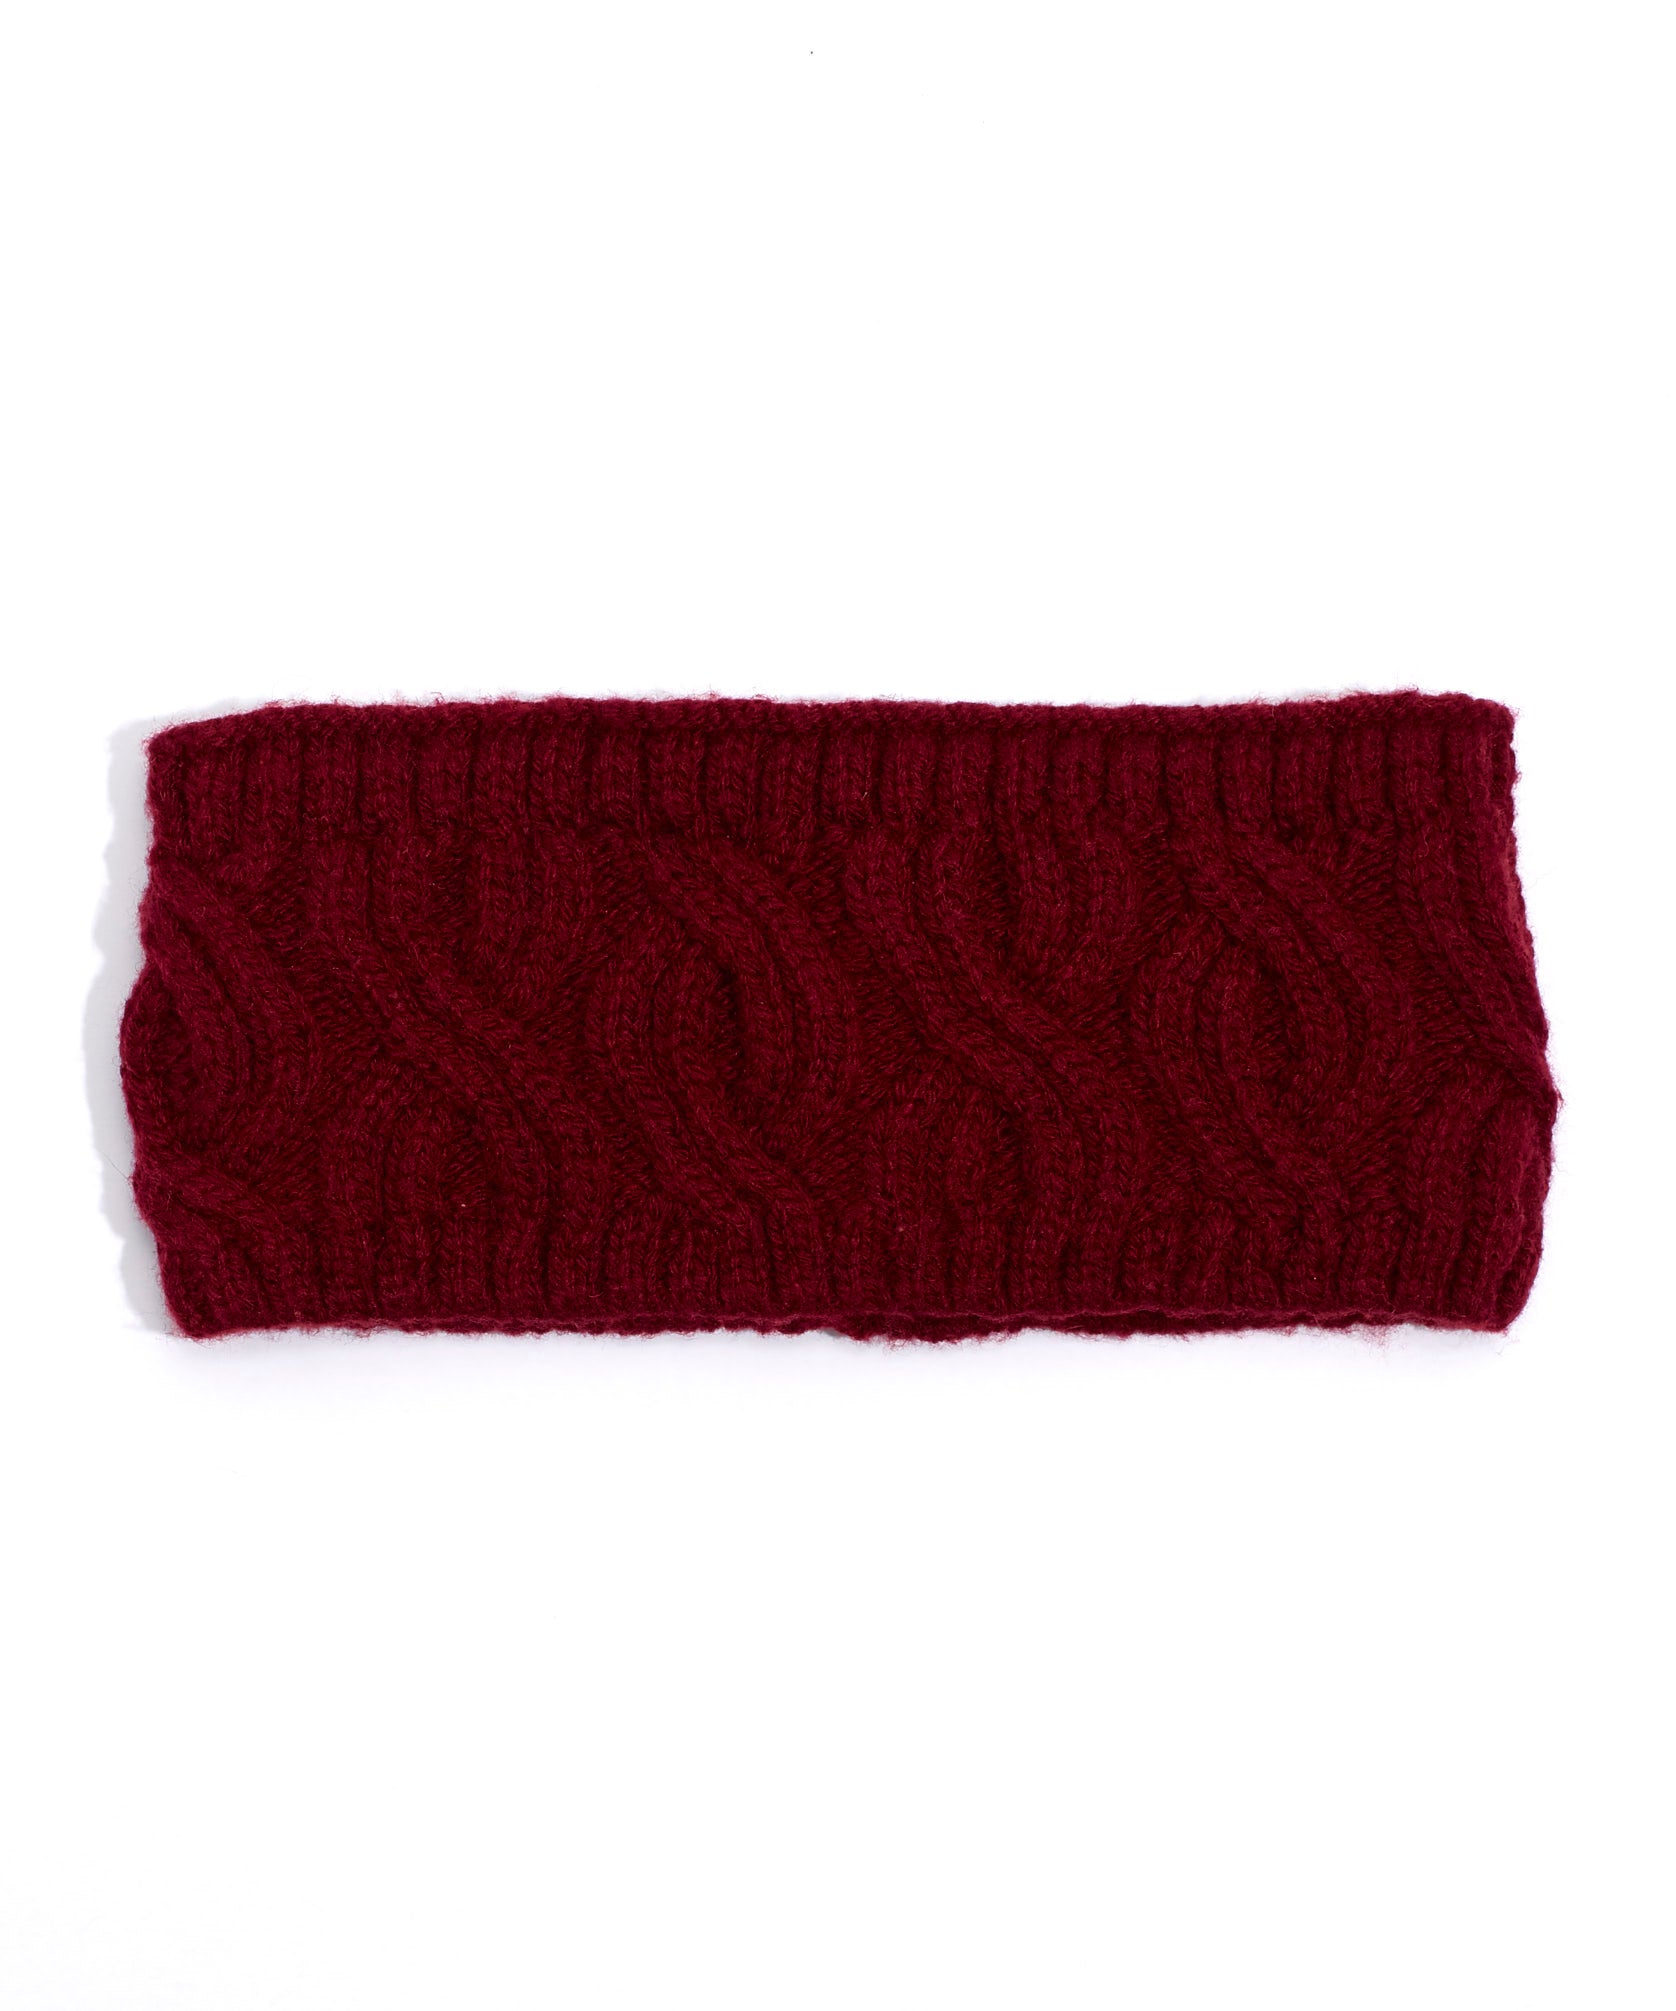 Recycled Headband in color Rhubarb